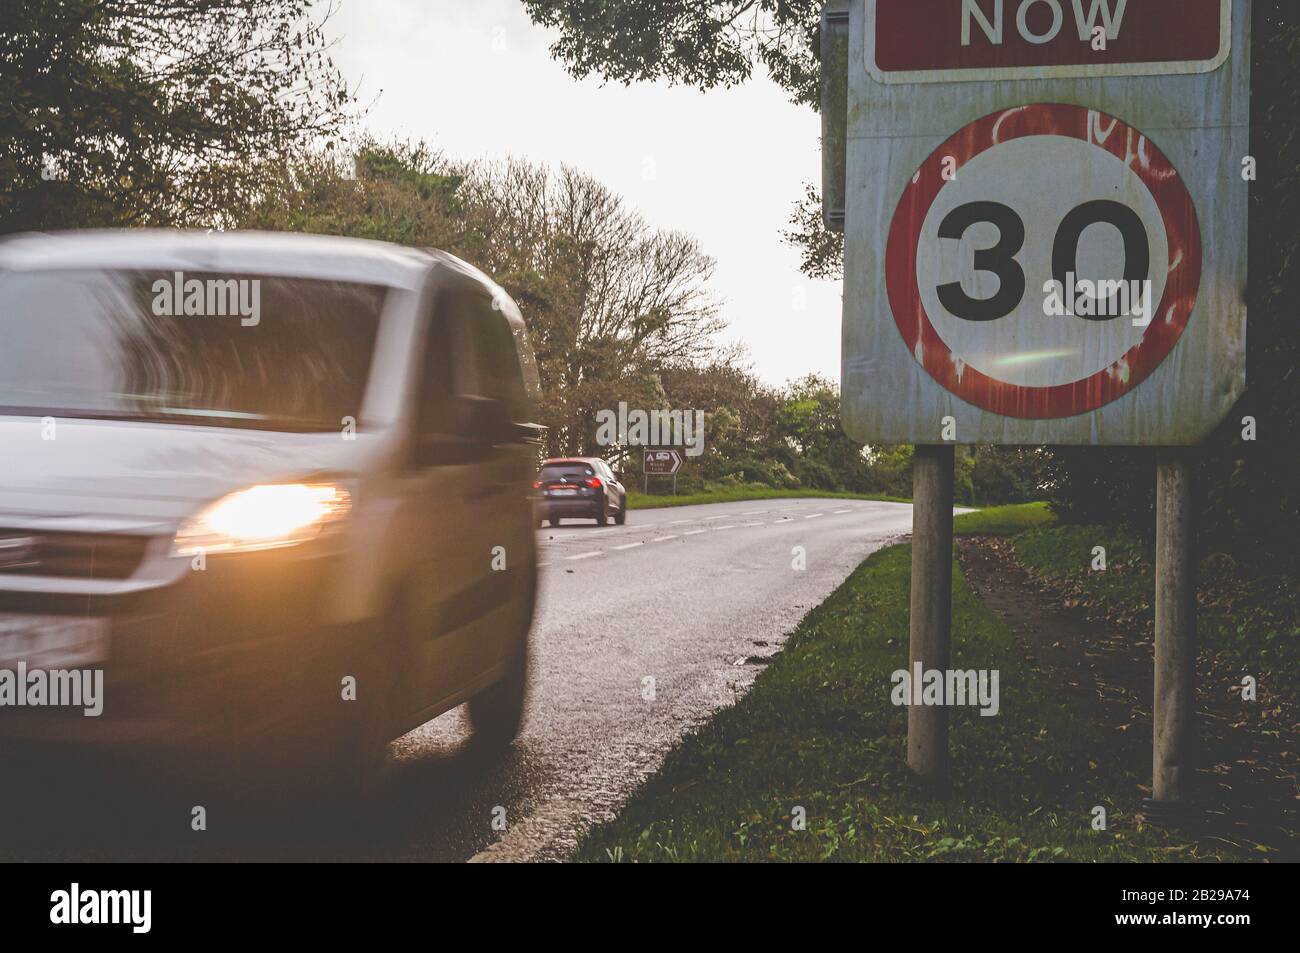 Speeding cards travel in opposite directions on a country line.  30 mph road sign on right of frame, with car driving past at speed. Stock Photo